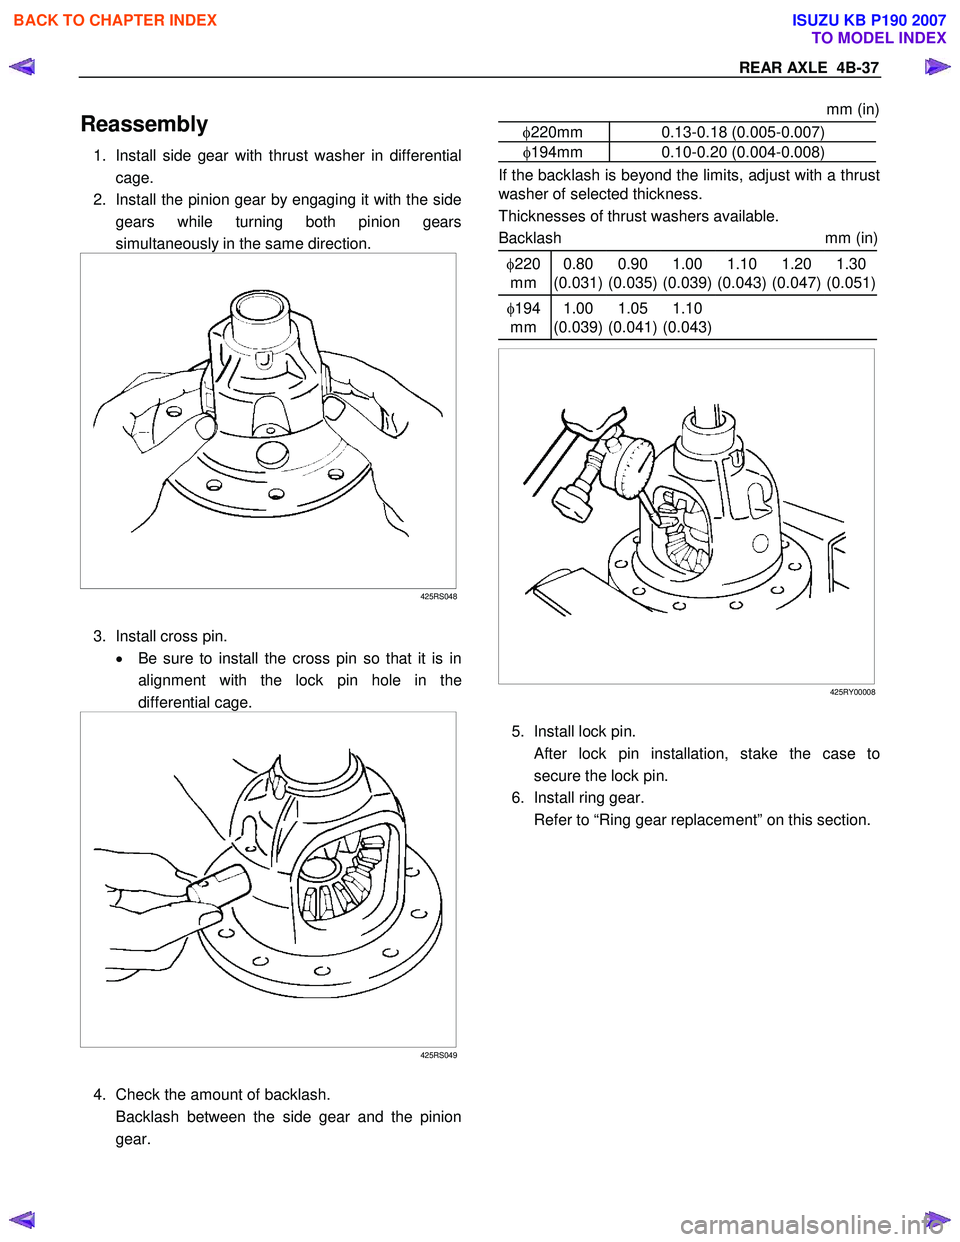 ISUZU KB P190 2007  Workshop Repair Manual REAR AXLE  4B-37 
Reassembly 
1.  Install side gear with thrust washer in differential
cage. 
2.  Install the pinion gear by engaging it with the side gears while turning both pinion gears 
simultaneo